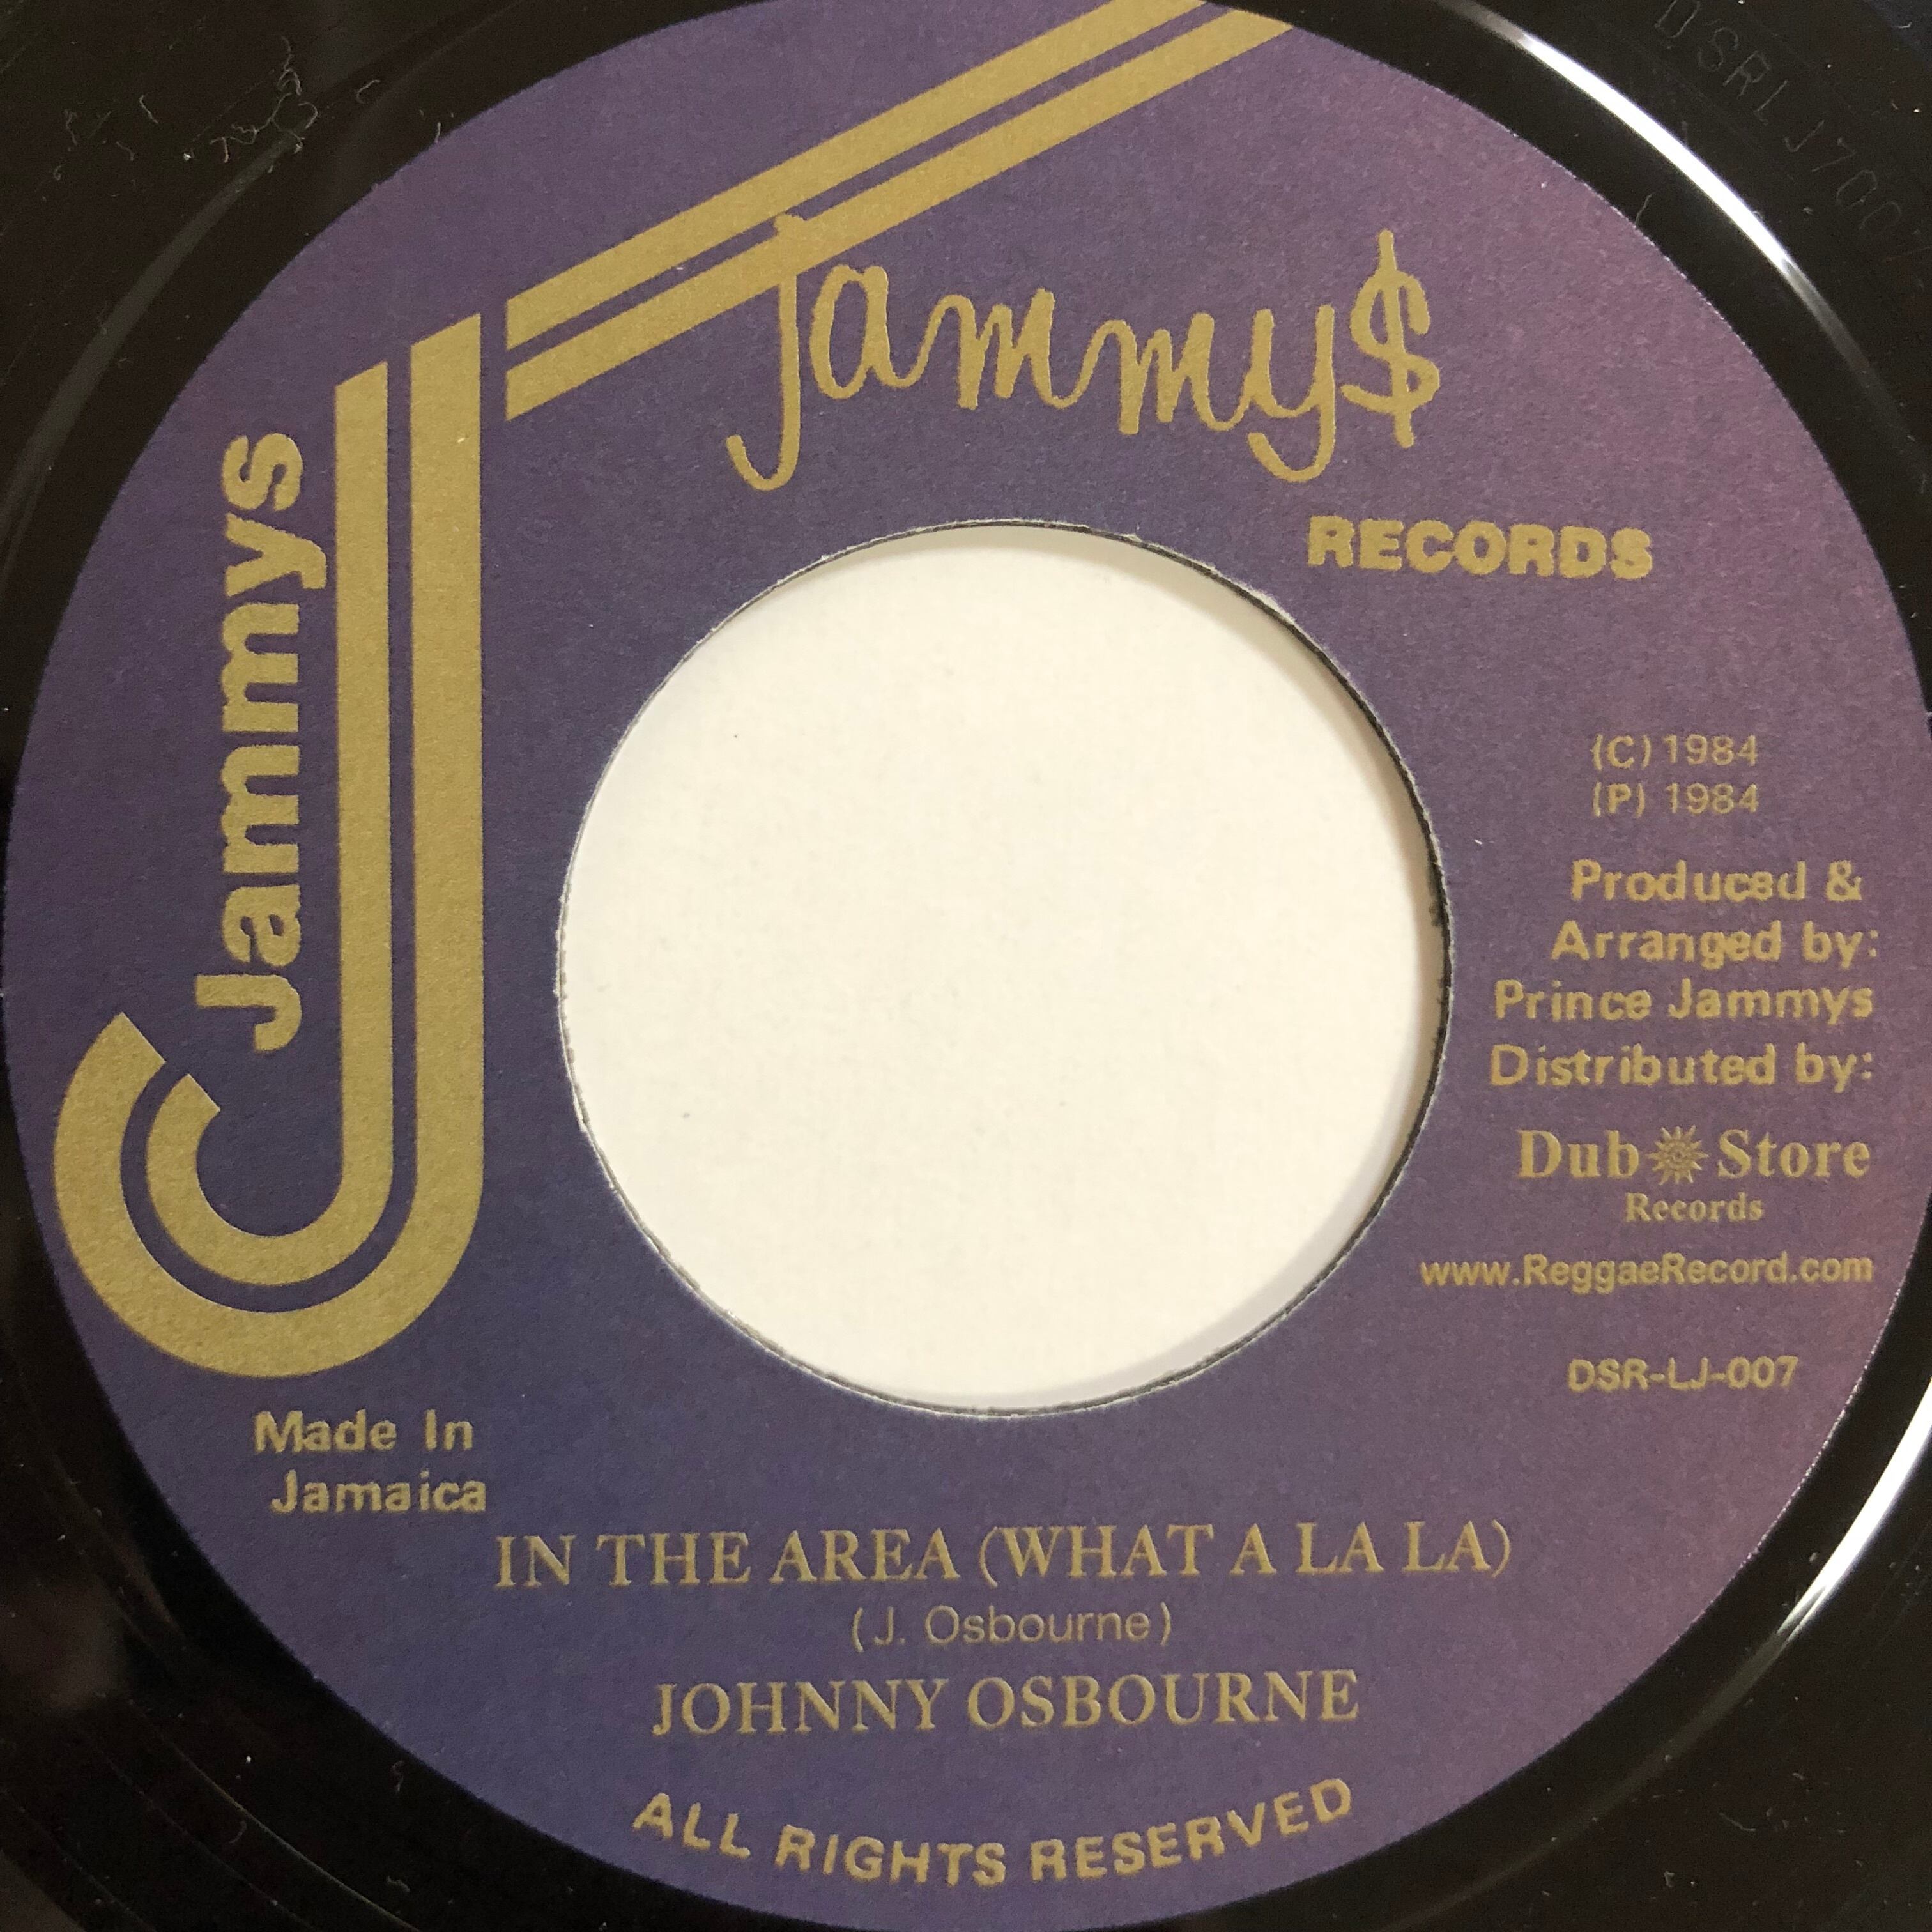 Johnny Osbourne（ジョニーオズボーン） - In The Area (What A La La)【7-20139】